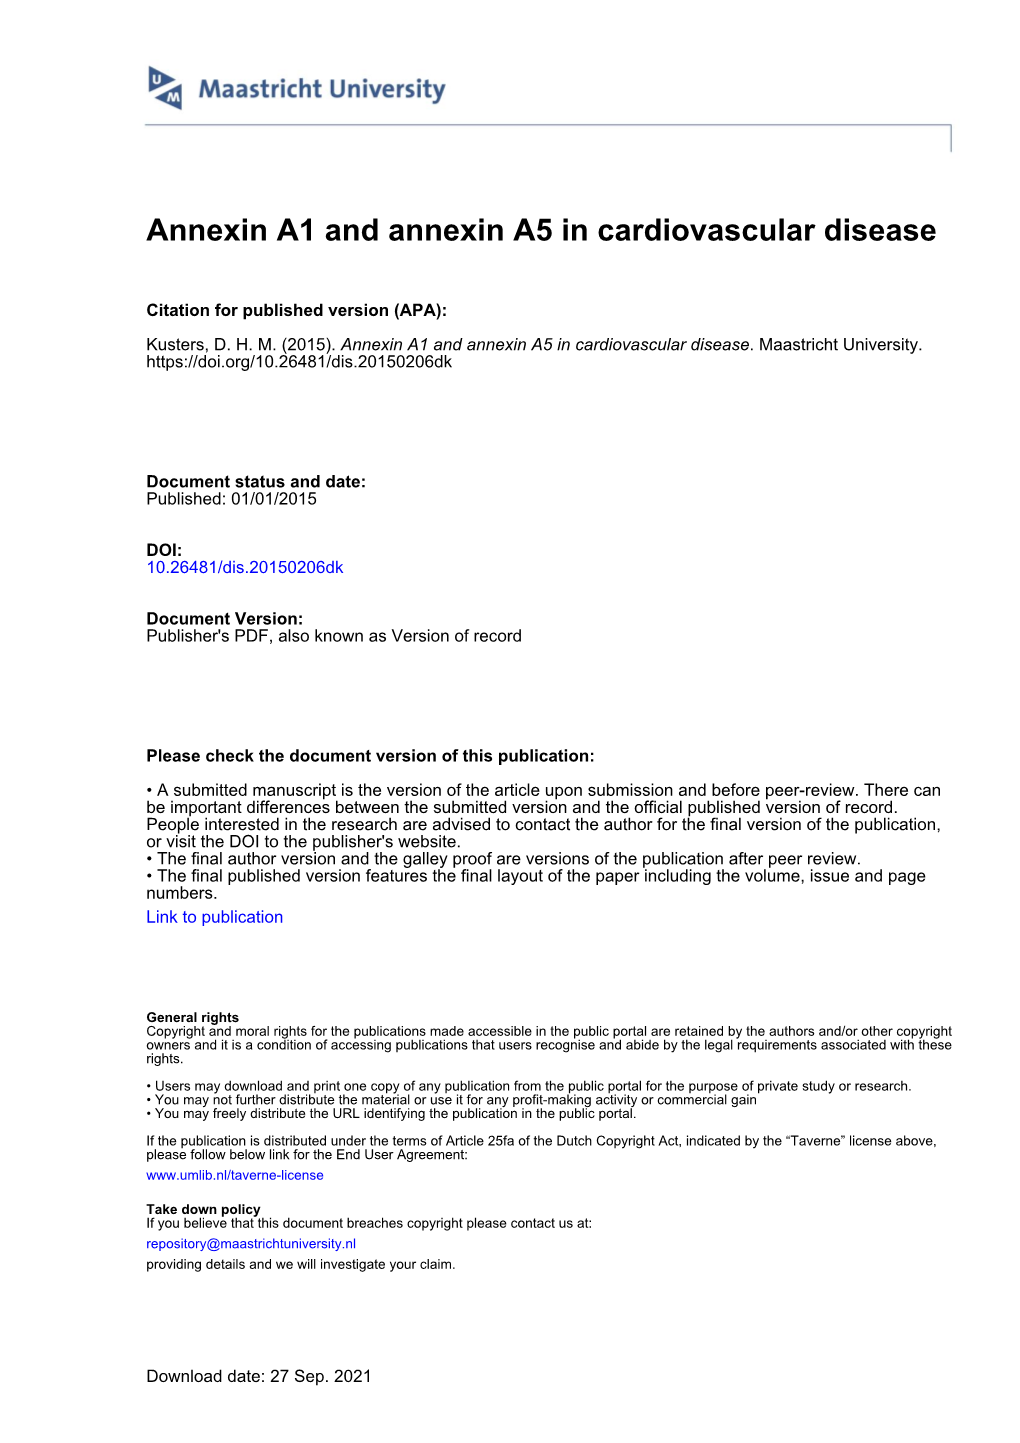 Annexin A1 and Annexin A5 in Cardiovascular Disease